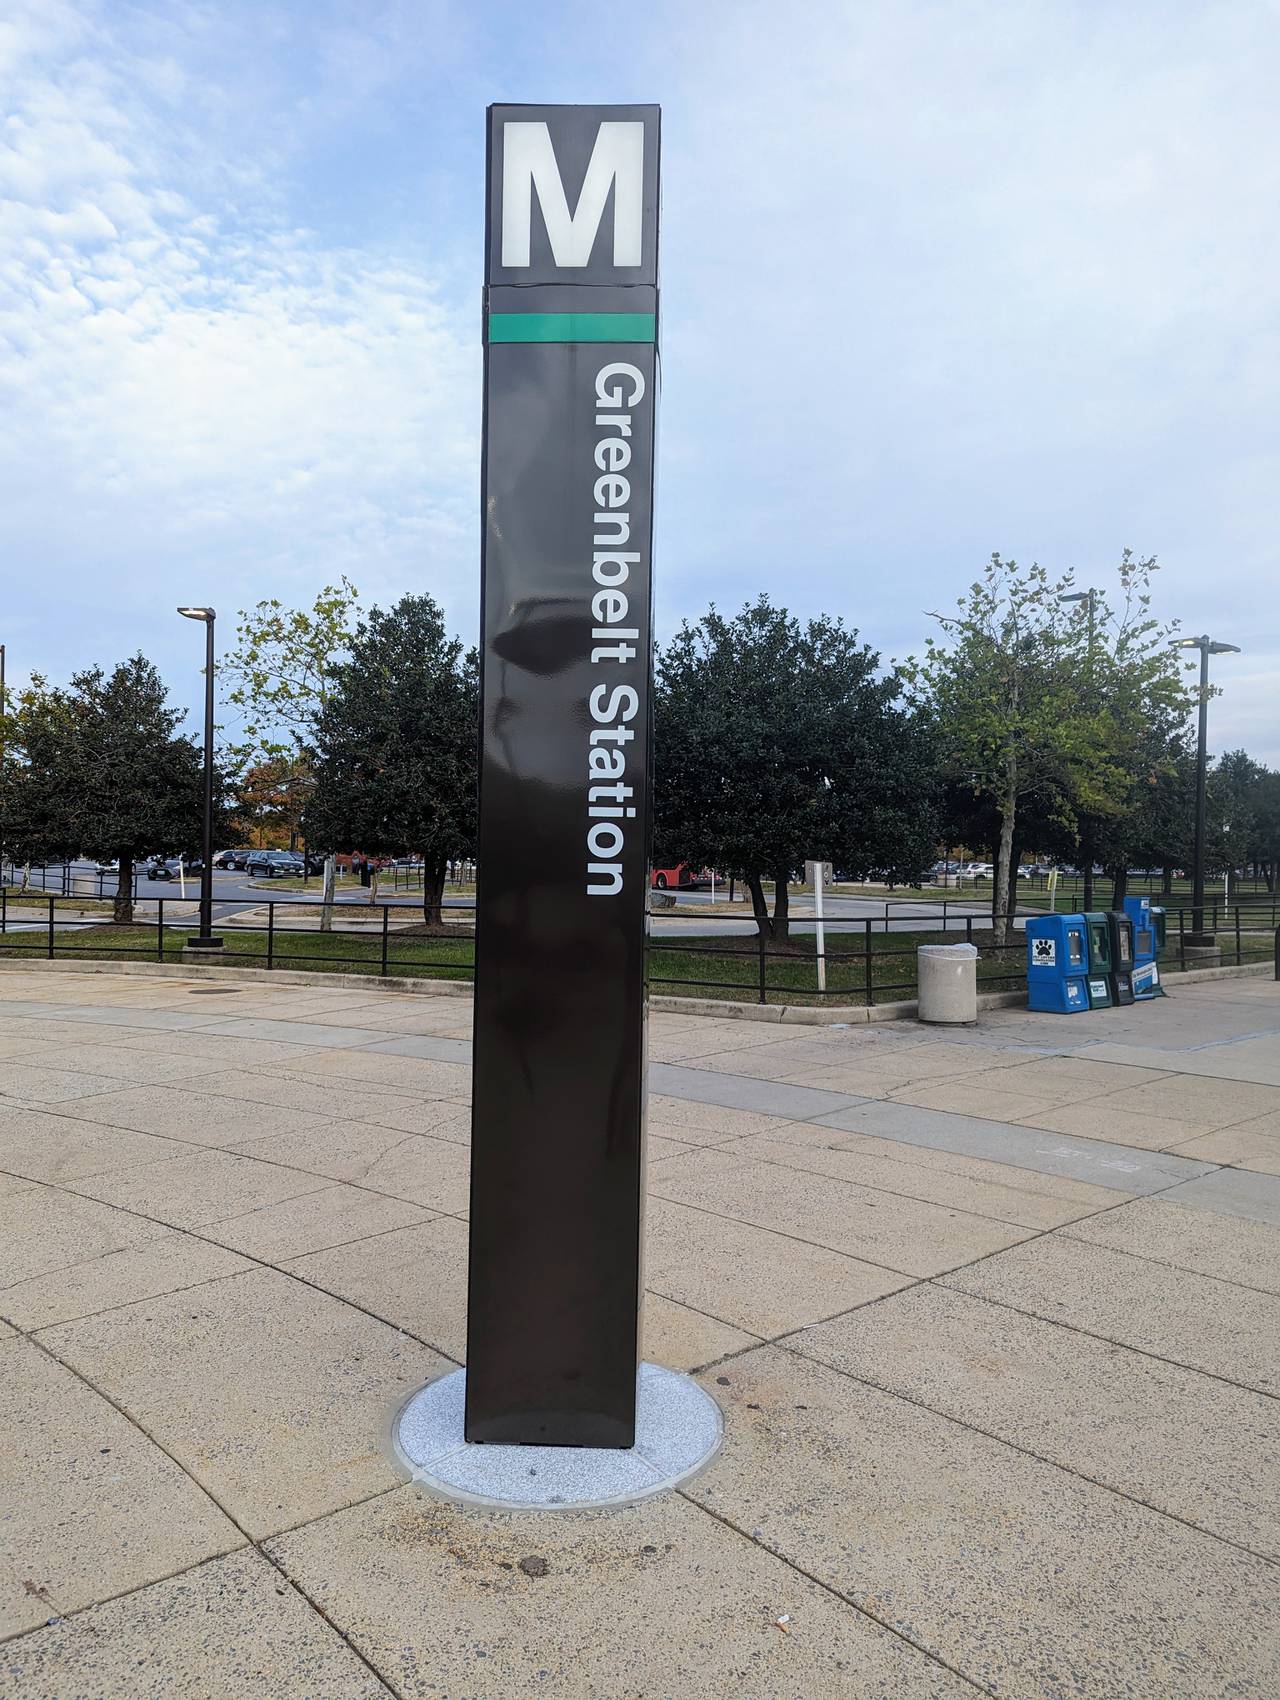 Greenbelt Station is the end of the line for Metro rail, but connects to a wide bus system and MARC rail for travel deeper into Maryland.